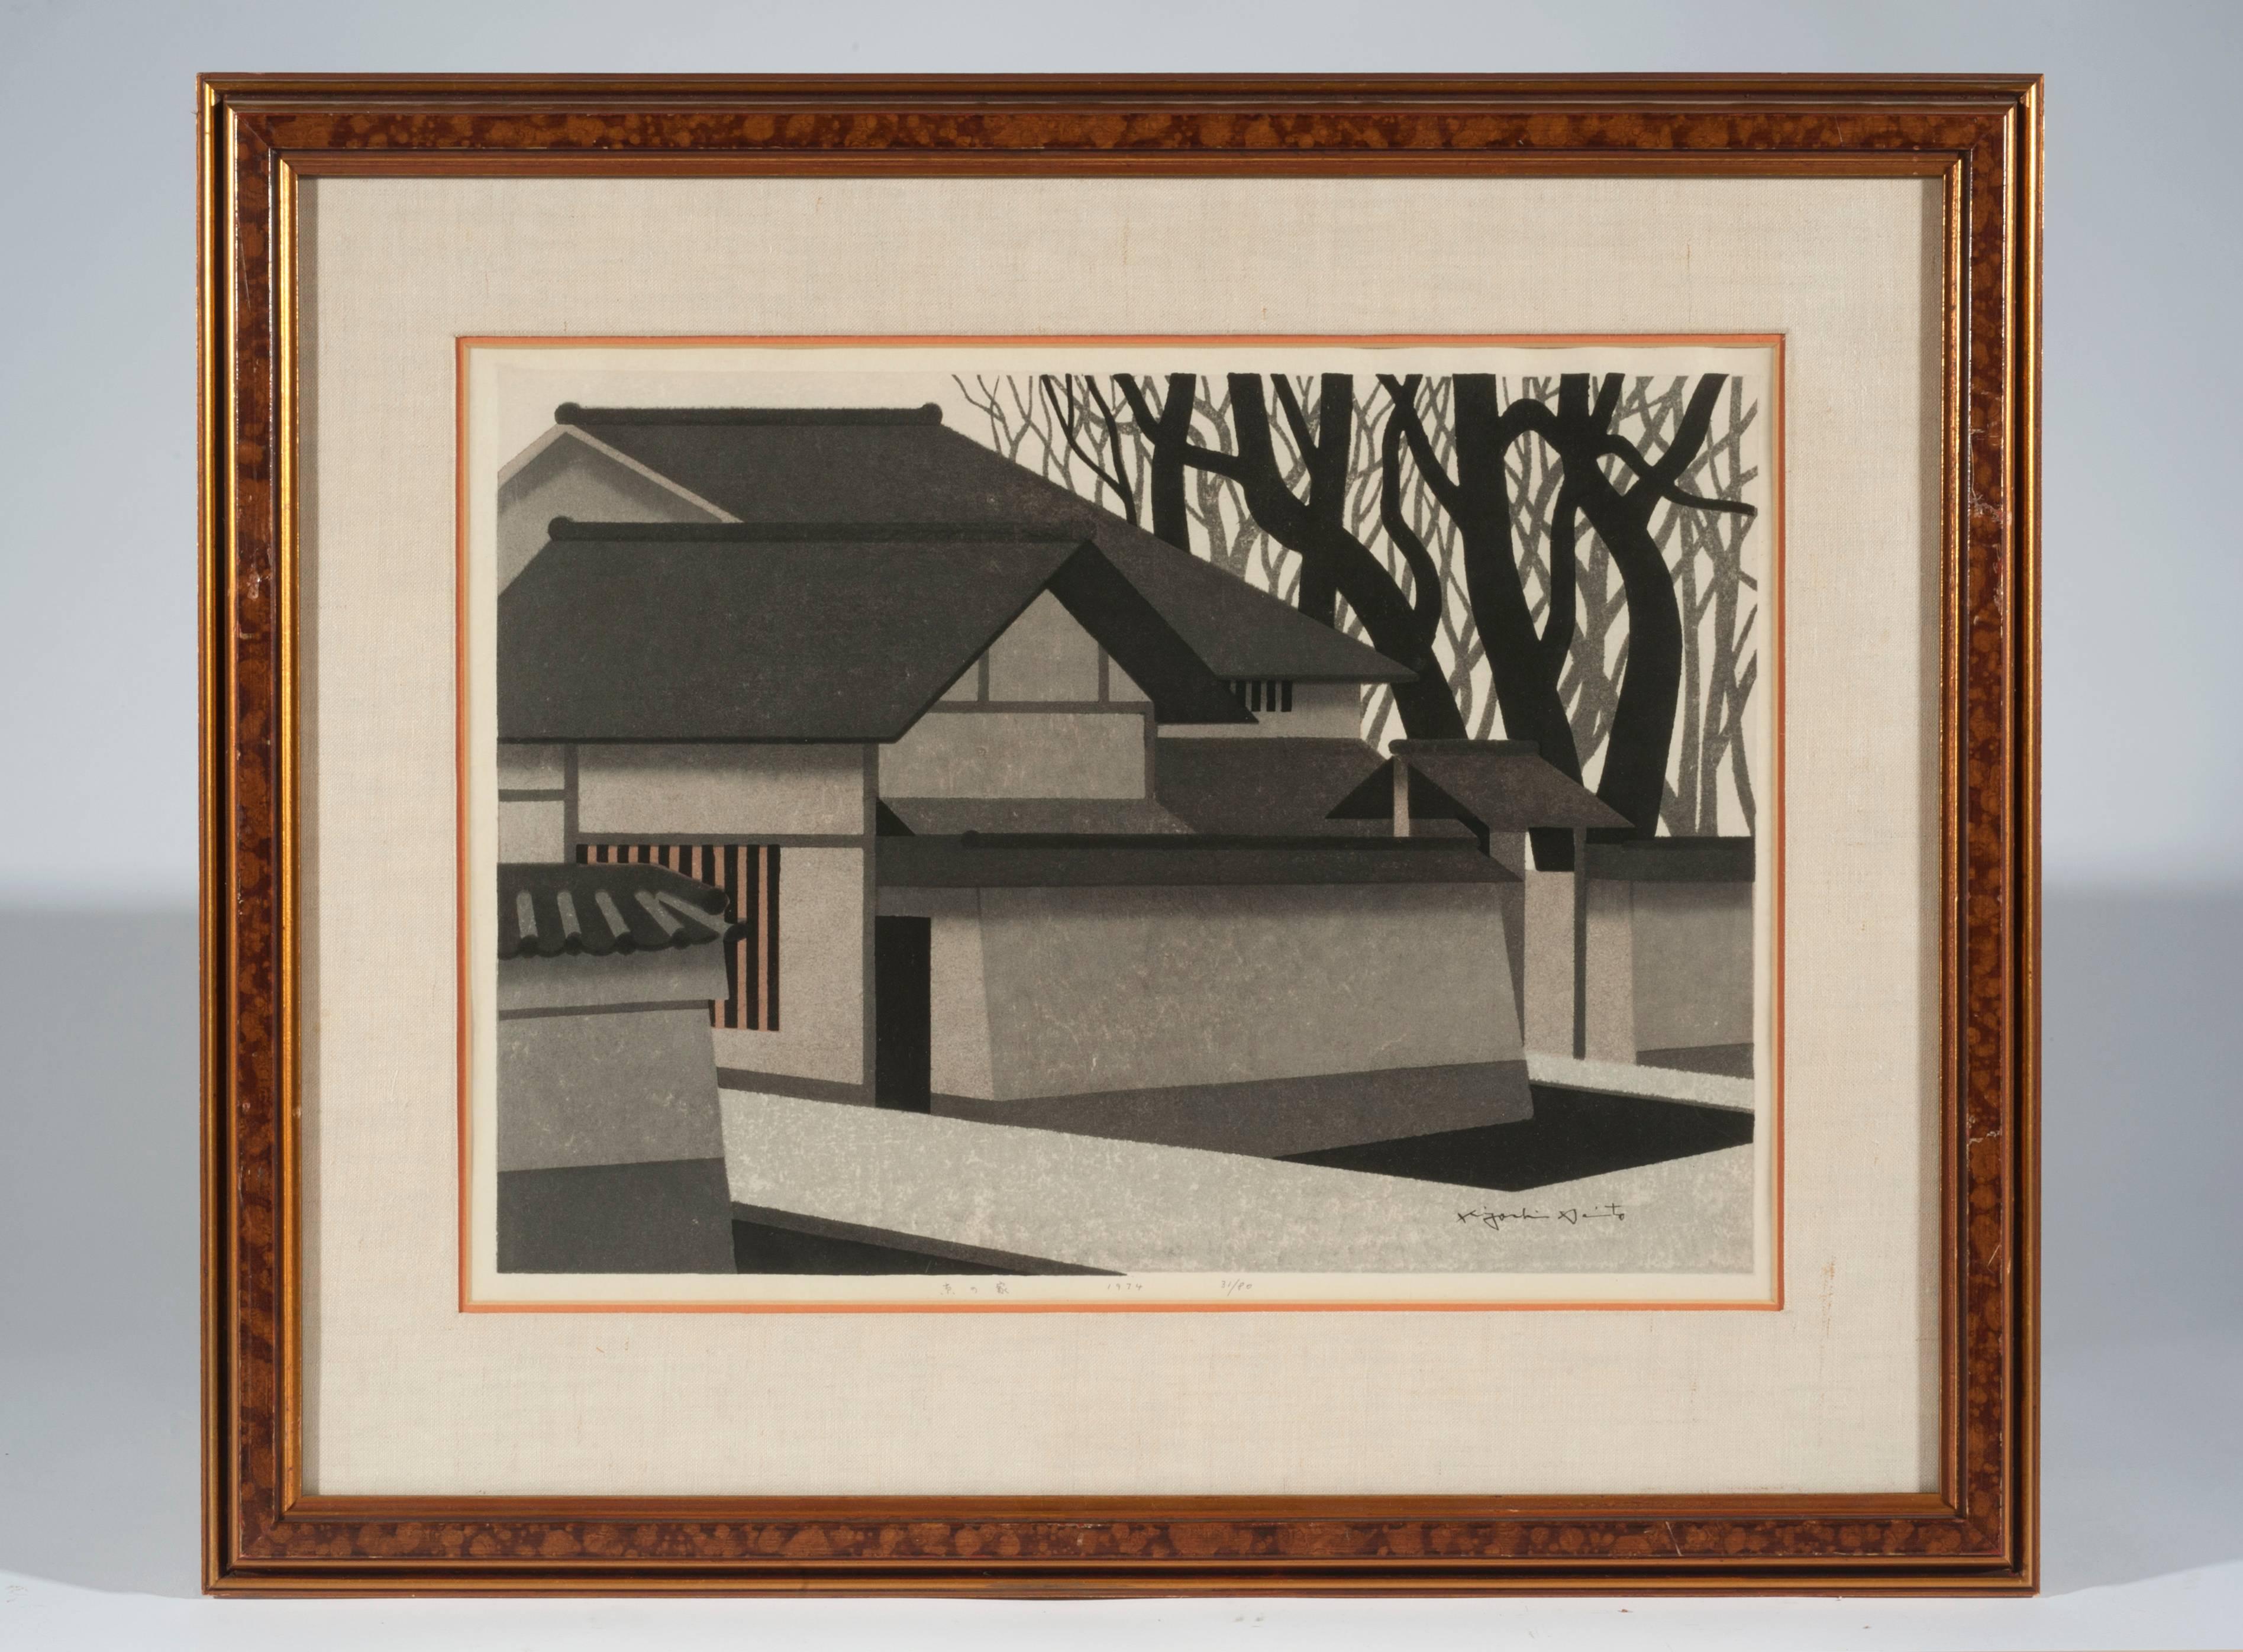 Beautiful architectural woodblock print by master artist Kiyoshi Saito (1907-1997). Dated 1974 and hand numbered 31/80. Print is in excellent condition. Matted and framed it measures 30.5 inches W x 26 H. Print measures 21.5 W x 16 H.